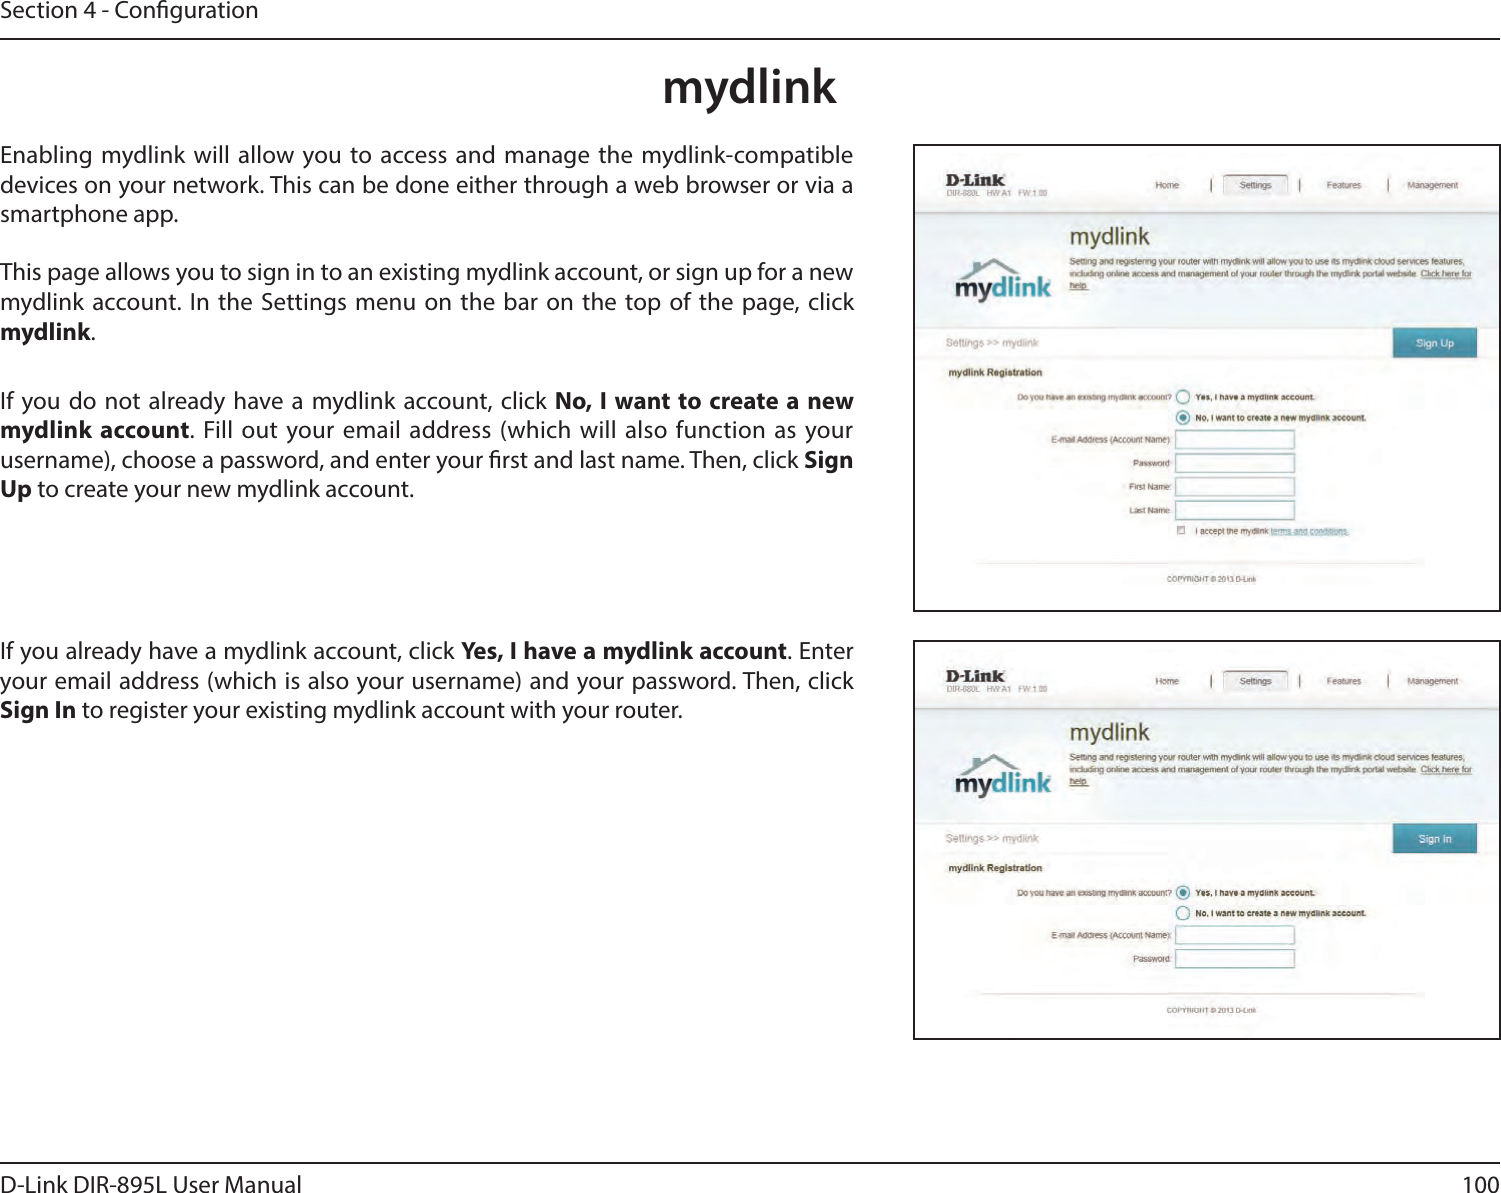 100D-Link DIR-895L User ManualSection 4 - CongurationmydlinkEnabling mydlink will allow you to access and manage the mydlink-compatible devices on your network. This can be done either through a web browser or via a smartphone app.This page allows you to sign in to an existing mydlink account, or sign up for a new mydlink account. In the Settings menu on the bar on the top of the page, click mydlink.If you do not already have a mydlink account, click No, I want to create a new mydlink account. Fill out your email address (which will also function as your username), choose a password, and enter your rst and last name. Then, click Sign Up to create your new mydlink account.If you already have a mydlink account, click Yes, I have a mydlink account. Enter your email address (which is also your username) and your password. Then, click Sign In to register your existing mydlink account with your router.